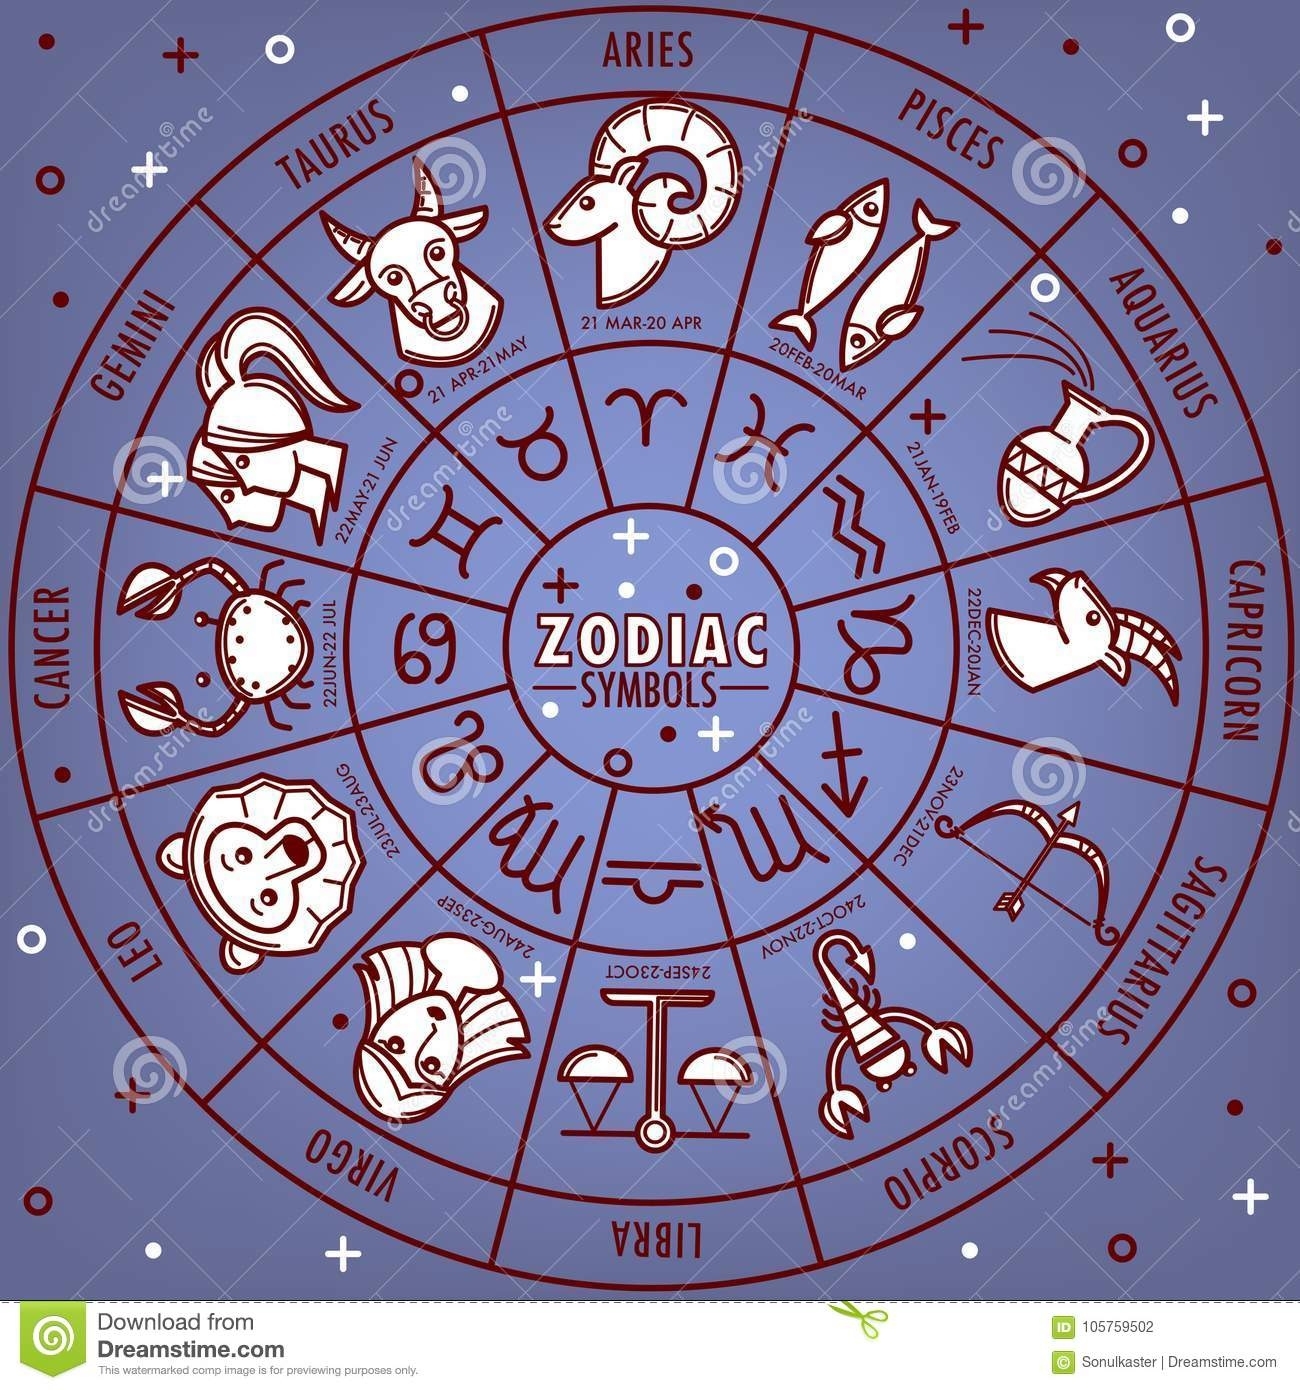 Zodiac Horoscope Signs With Dates Vector Icons On Star Map Zodiac Calendar Dates And Signs